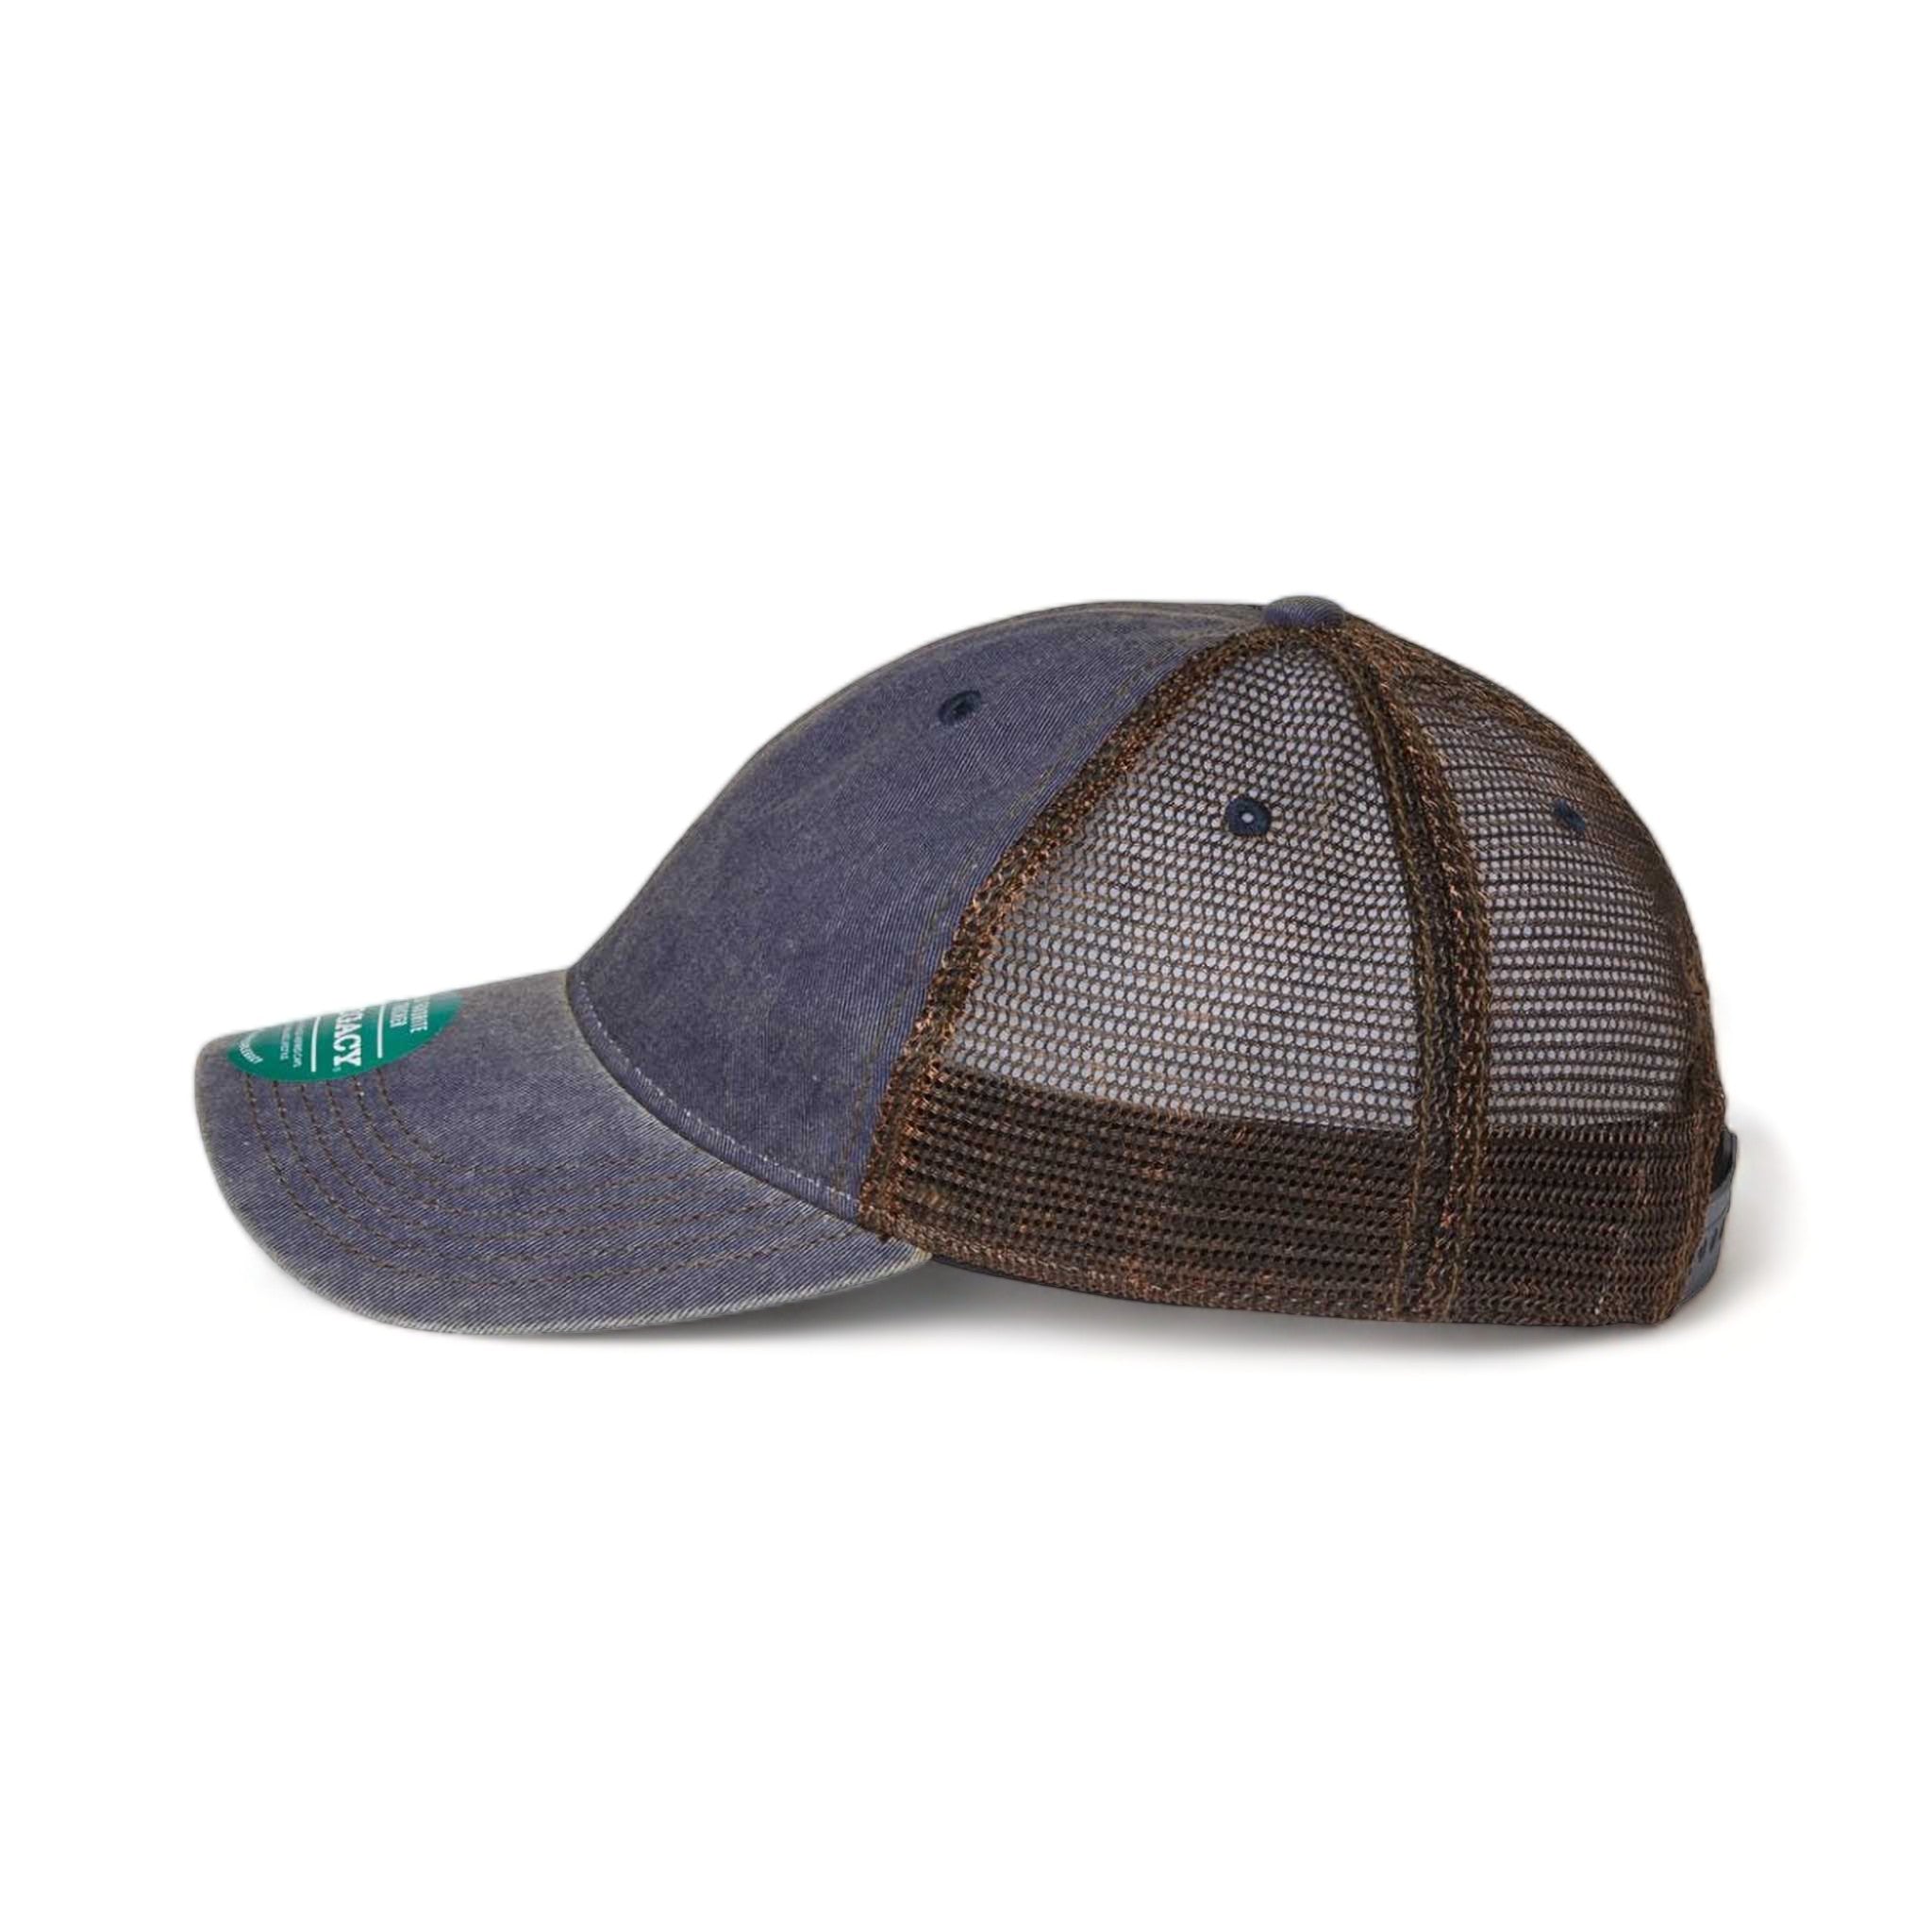 Side view of LEGACY OFA custom hat in navy and brown